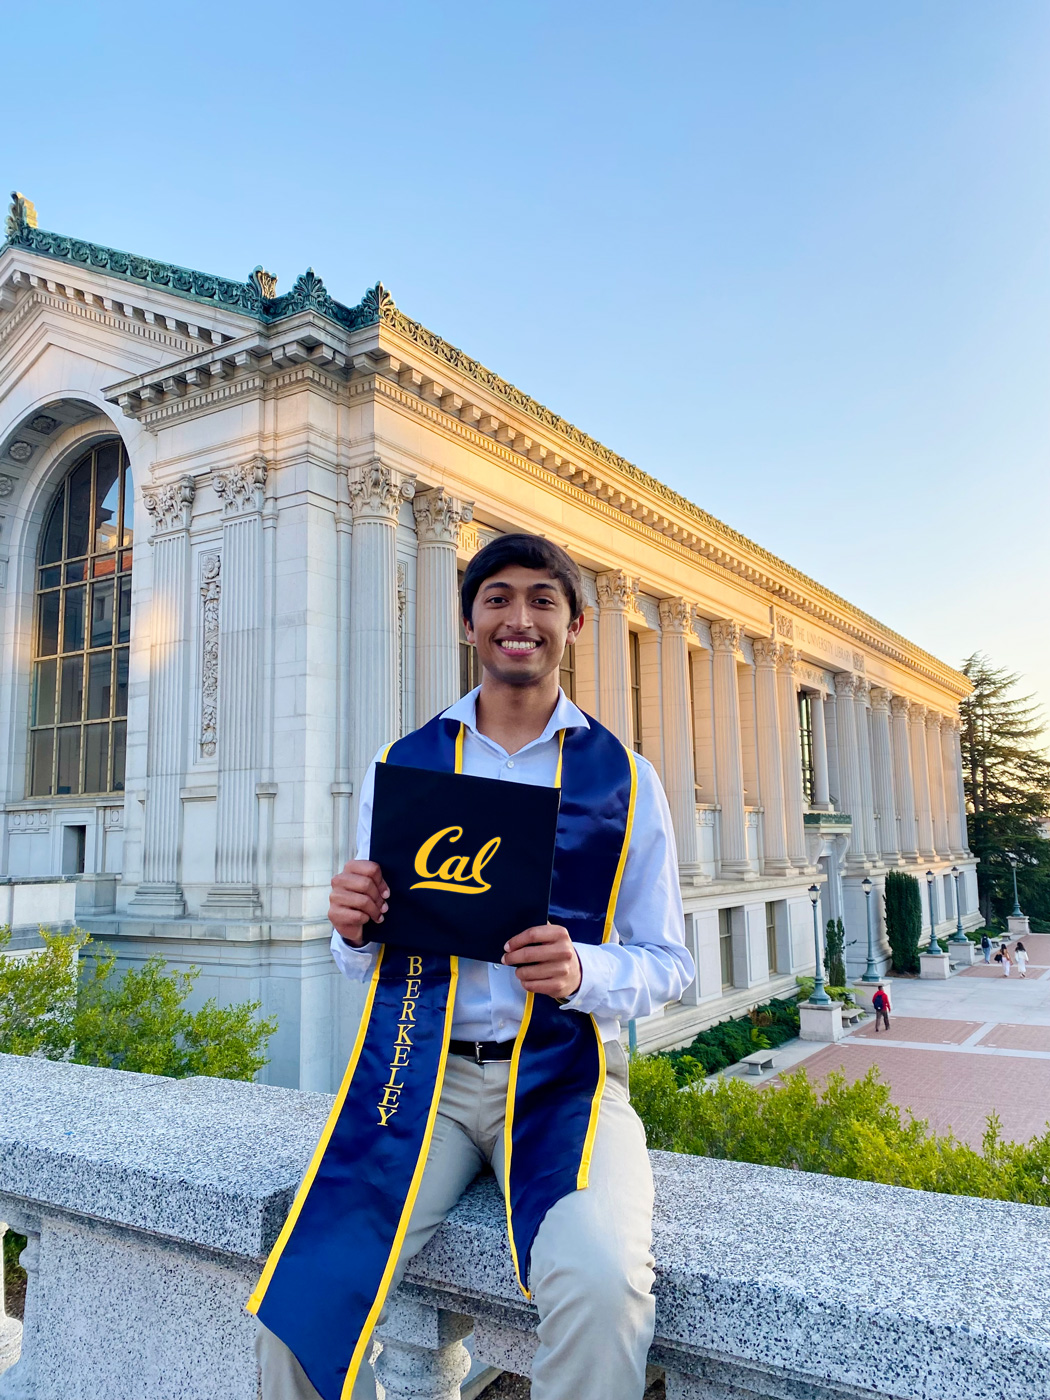 A photo of a young an sitting on a stone ledge in front of a building smiling. He holds a piece of paper that reads "Cal" written in script.